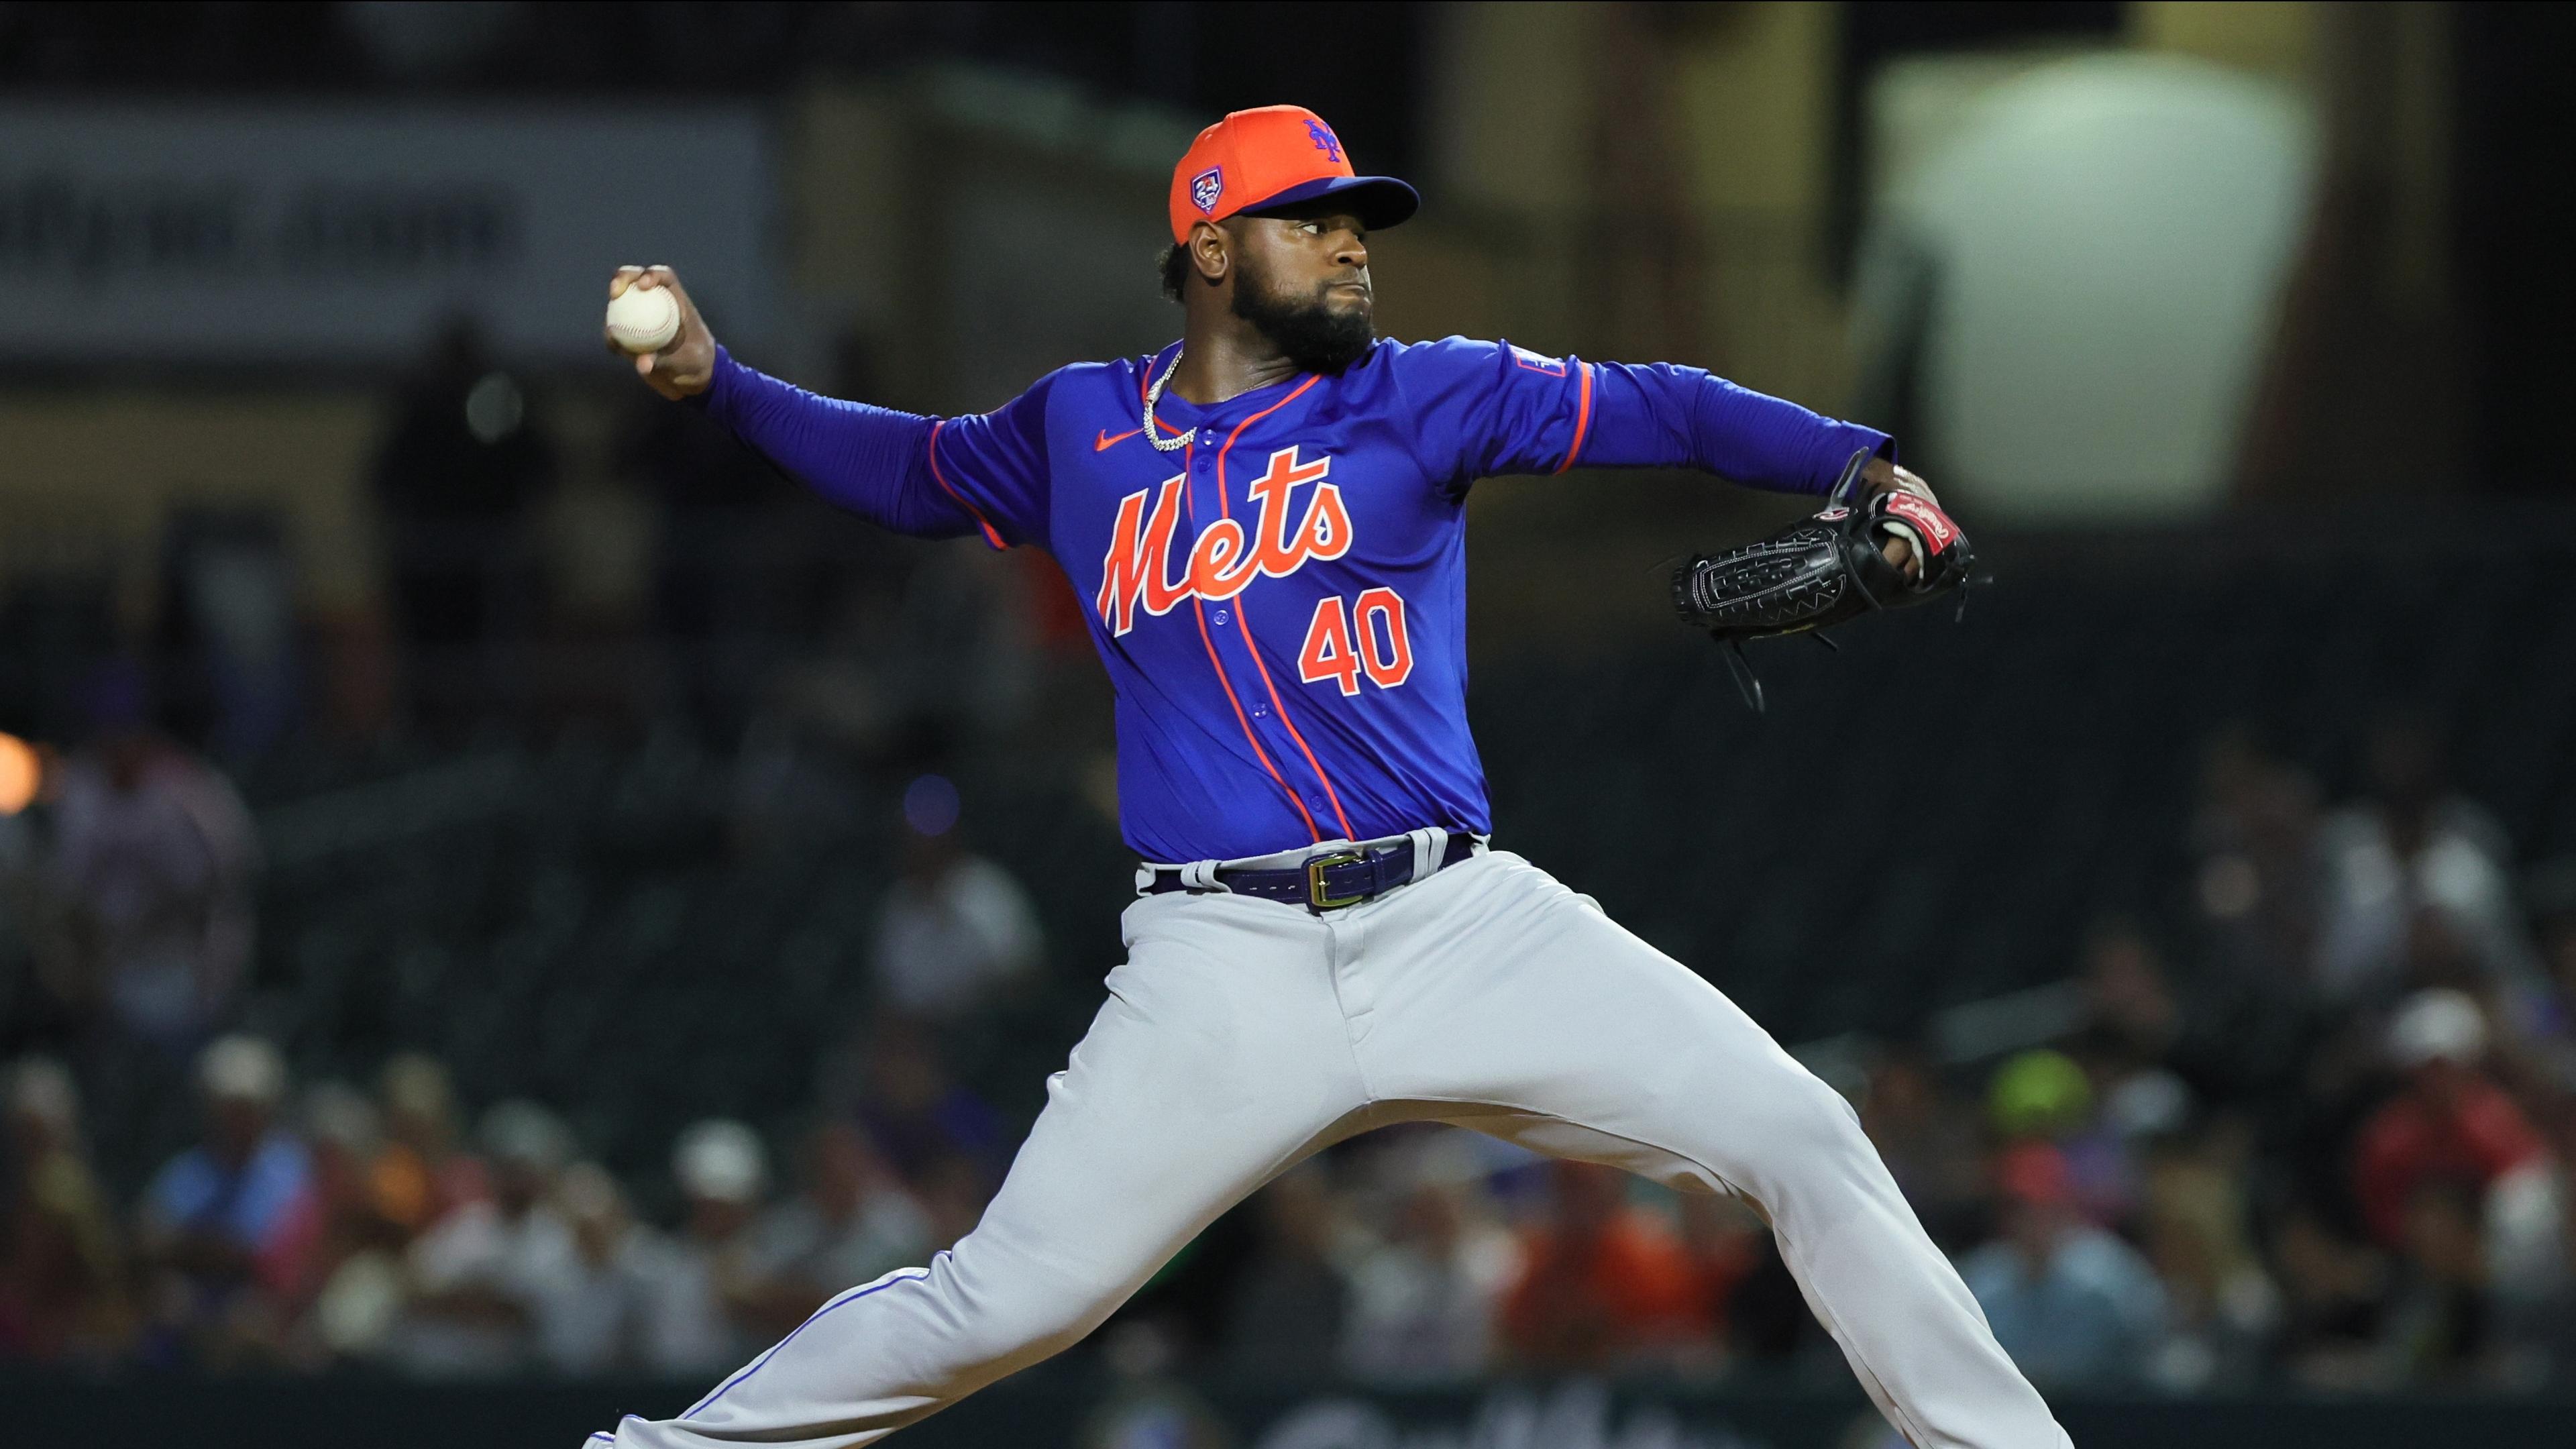 New York Mets starting pitcher Luis Severino (40) delivers a pitch against the Miami Marlins during the first inning at Roger Dean Chevrolet Stadium. / Sam Navarro-USA TODAY Sports